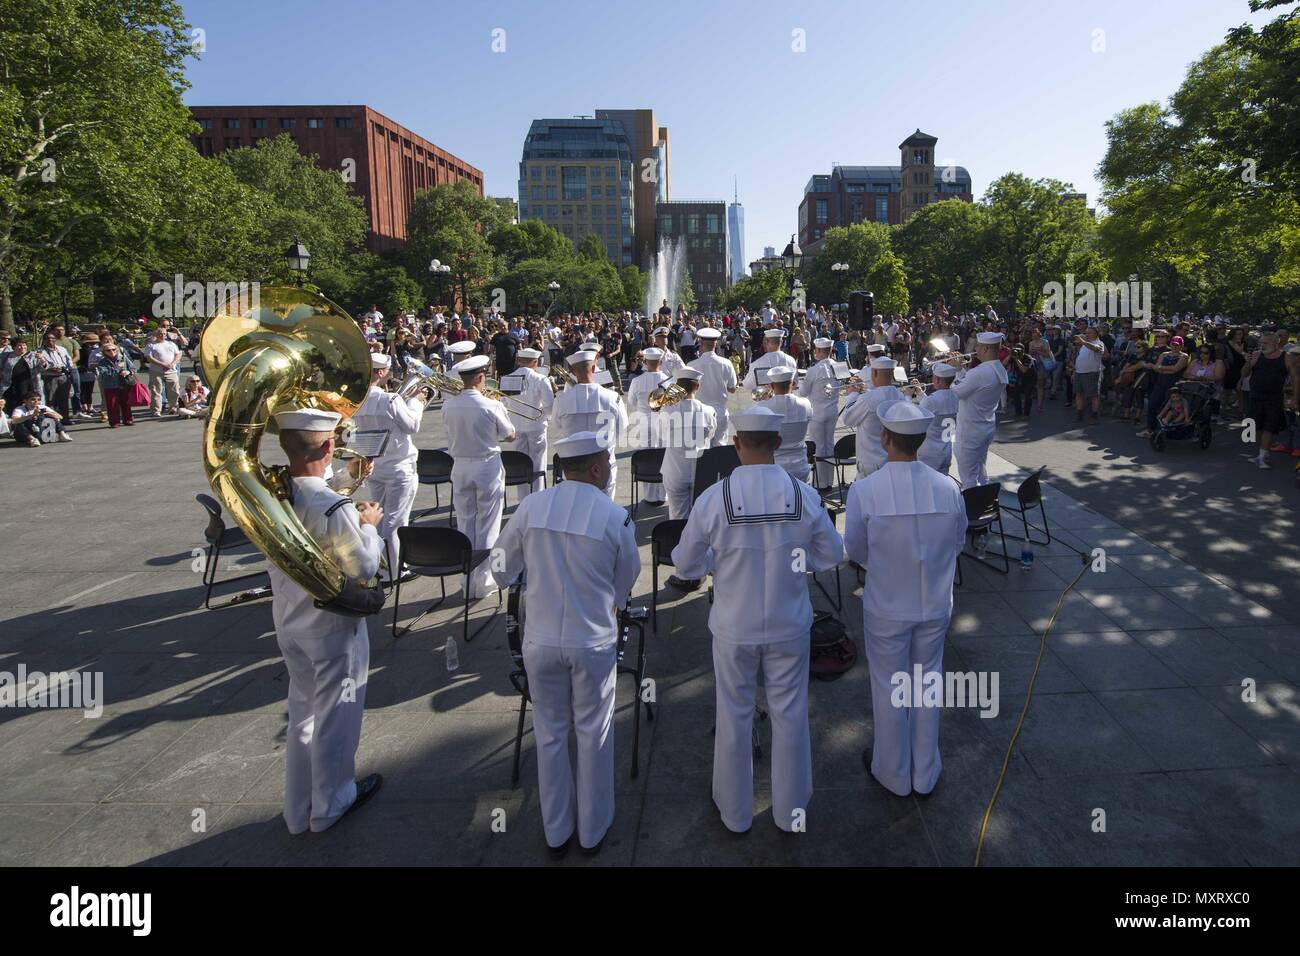 180524-N-BY095-0428 NEW YORK (May 24, 2018) Navy Band Northeast performs at Washington Square Park during Fleet Week New York (FWNY), May 24, 2018. Now in its 30th year FWNY is the city's time-honored celebration of the sea services. It is an unparalleled opportunity for the citizens of New York and the surrounding tri-state area to meet Sailors, Marines and Coast Guardsmen, as well as witness firsthand the latest capabilities of today's maritime services. (U.S. Navy photo by Mass Communication Specialist 3rd Class Maria I. Alvarez/Released). () Stock Photo